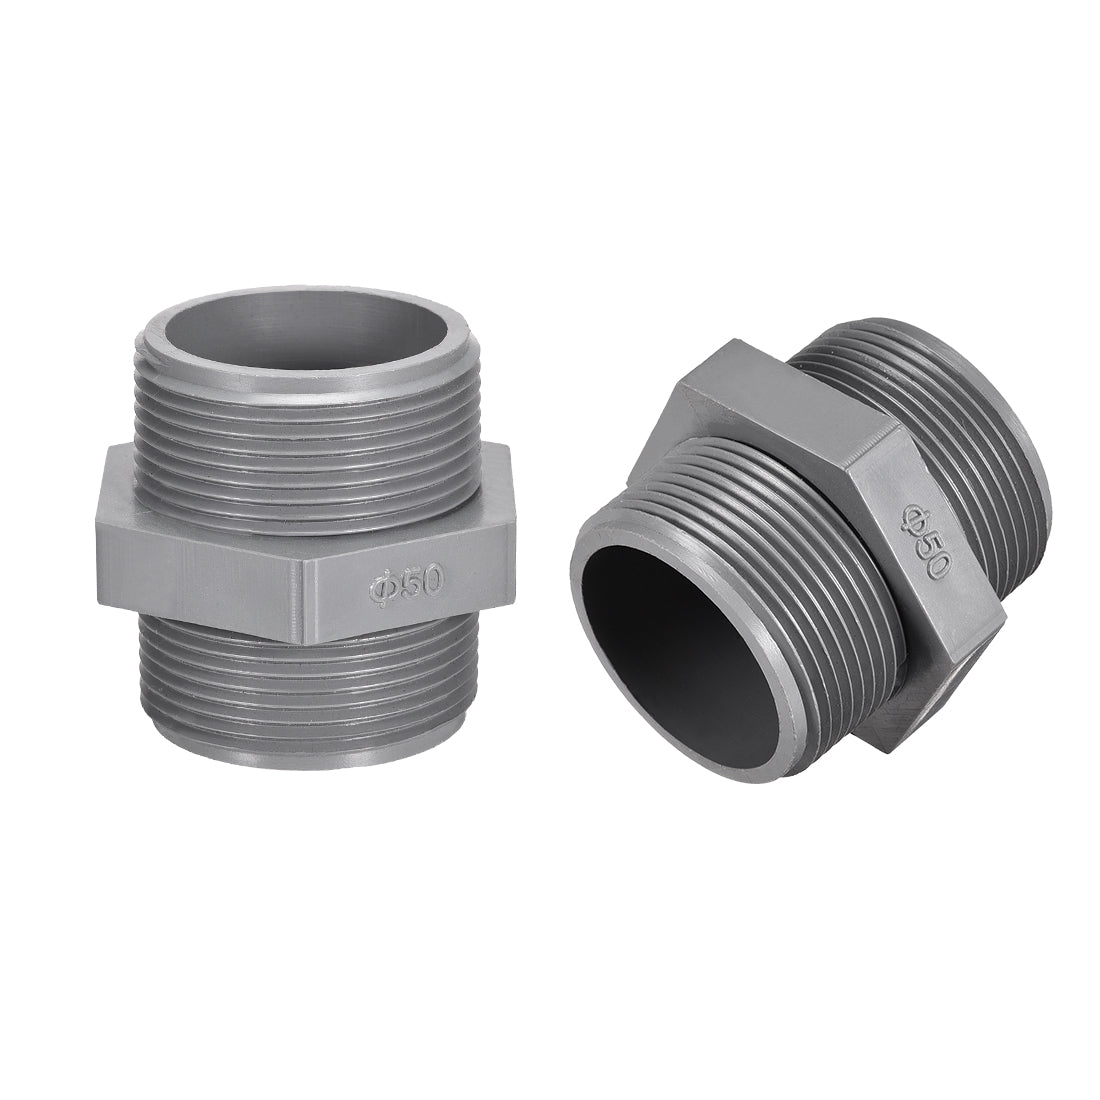 uxcell Uxcell Pipe Fittings Connector G1-1/2 Male Thread Adapter Plastic Hex Connector 2pcs